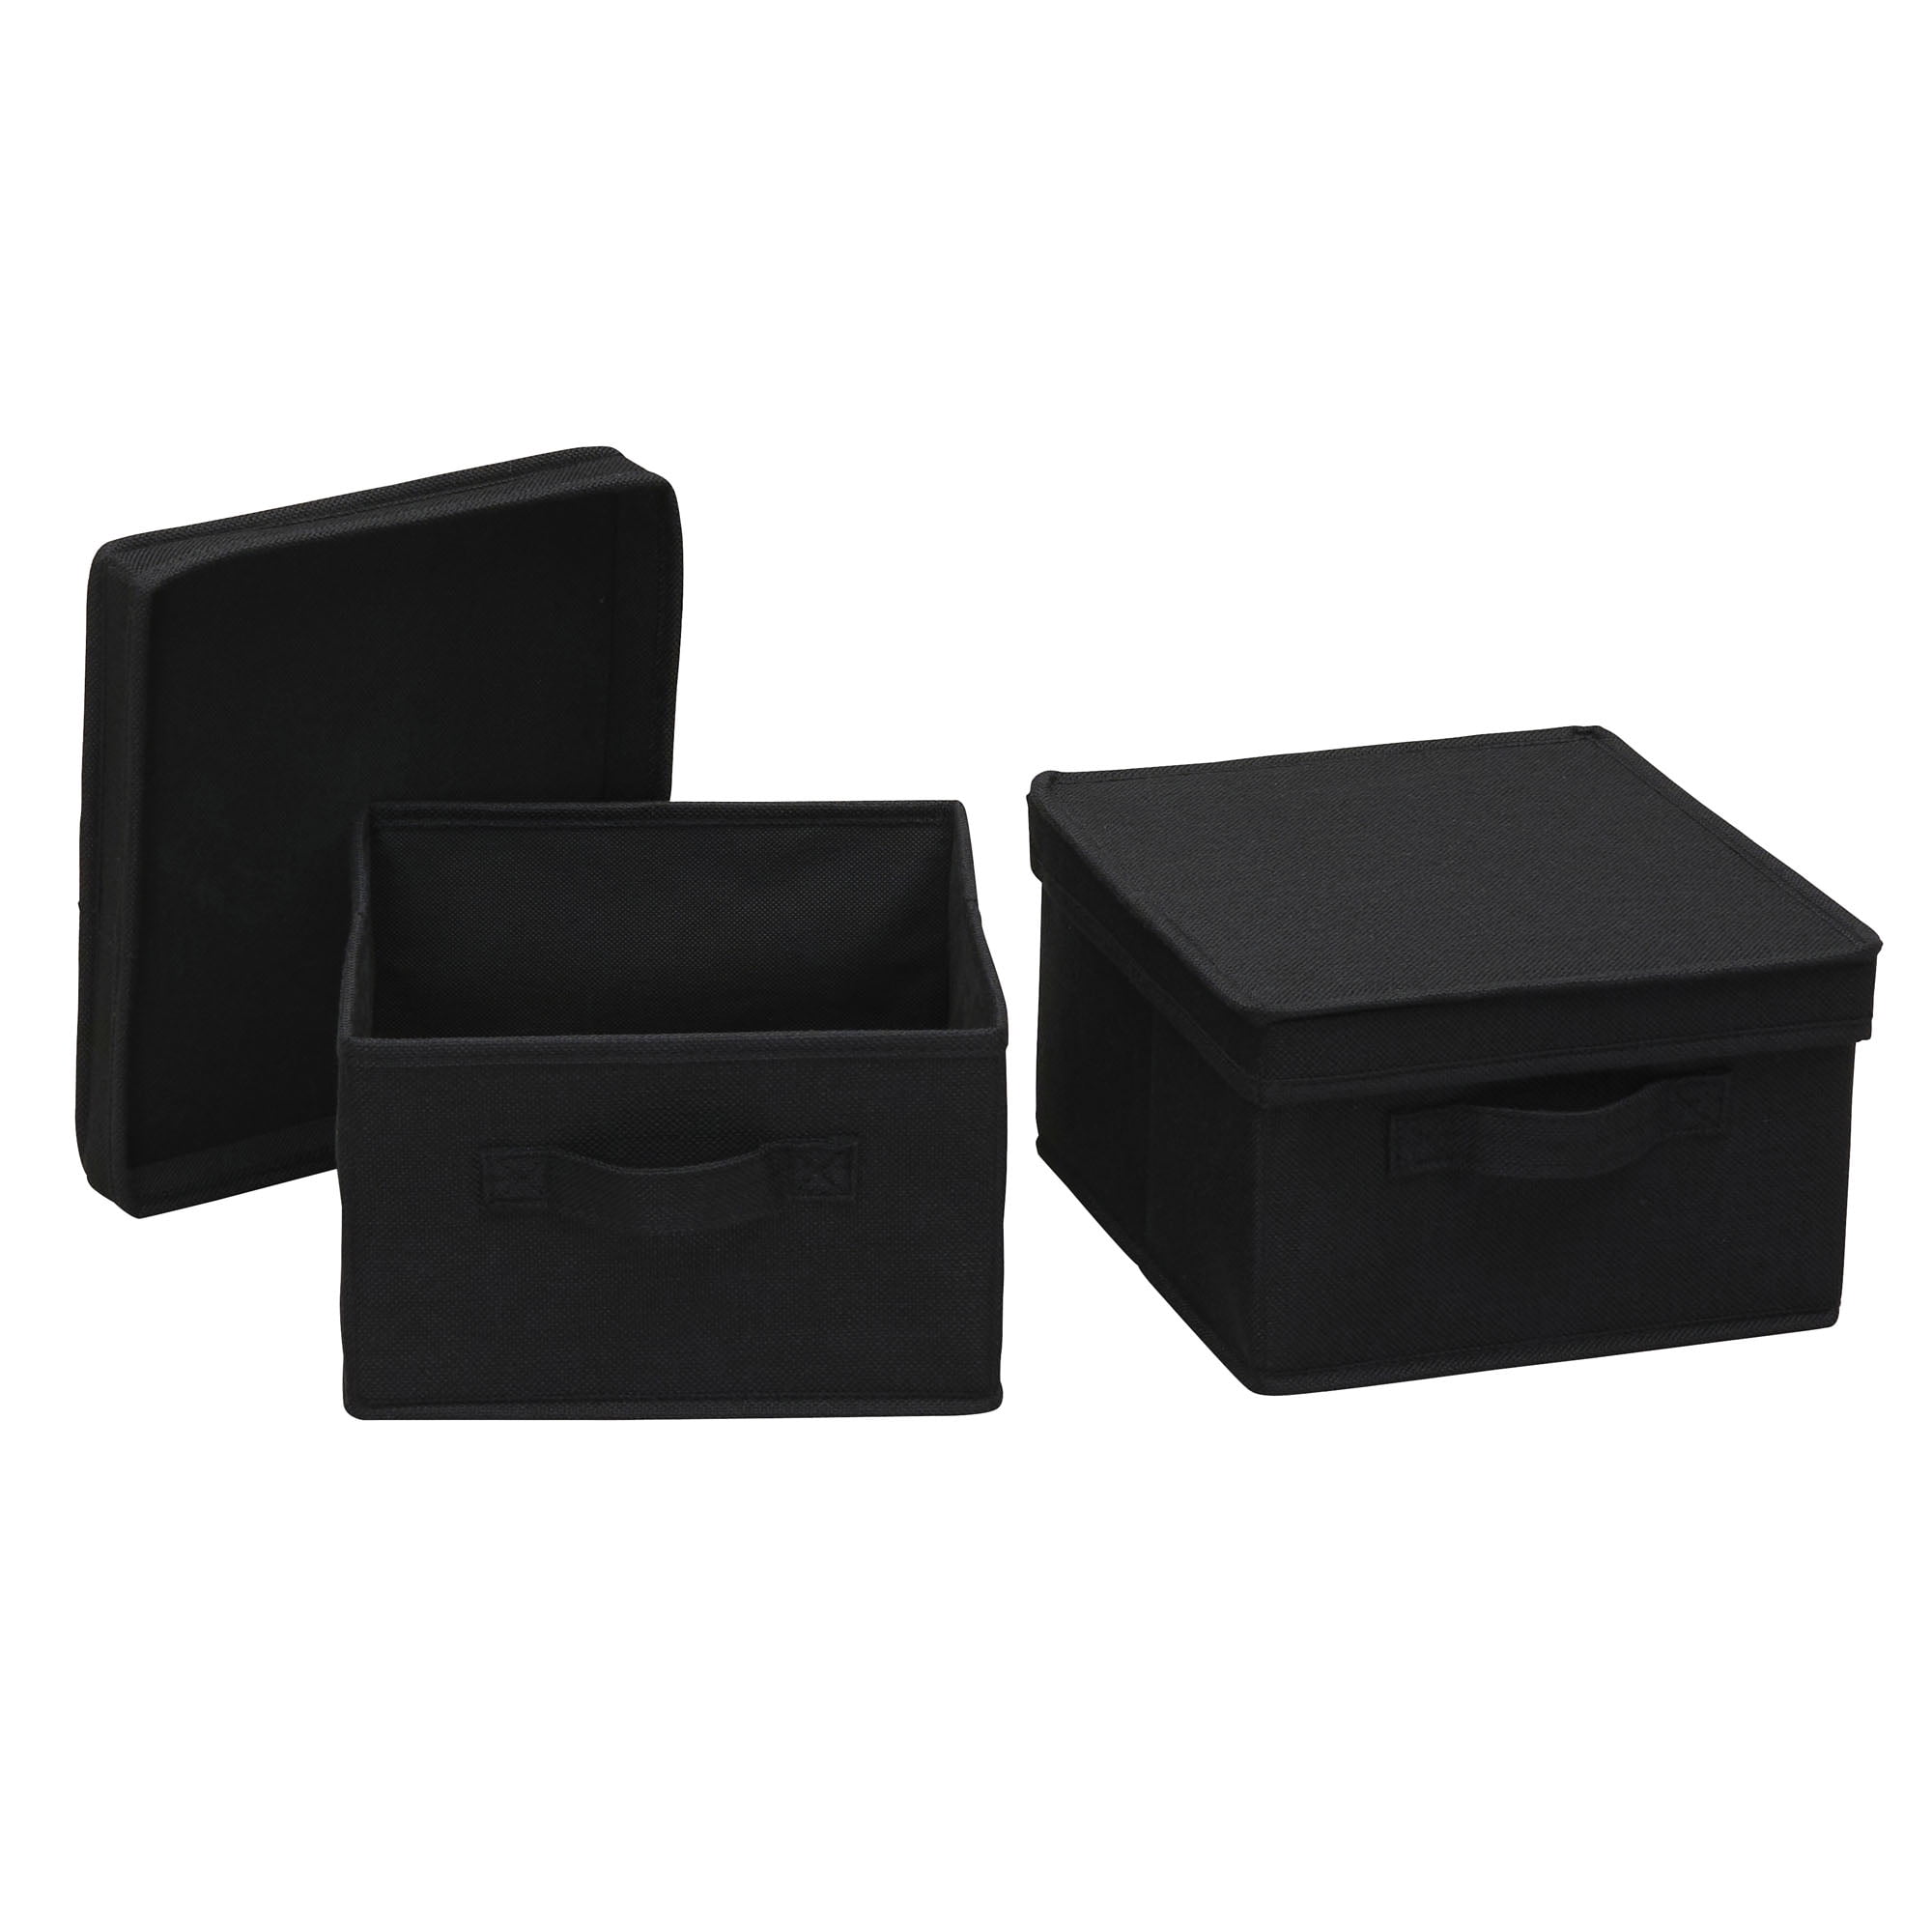 PROP-It Acid Free Storage Boxes for Quilts & More